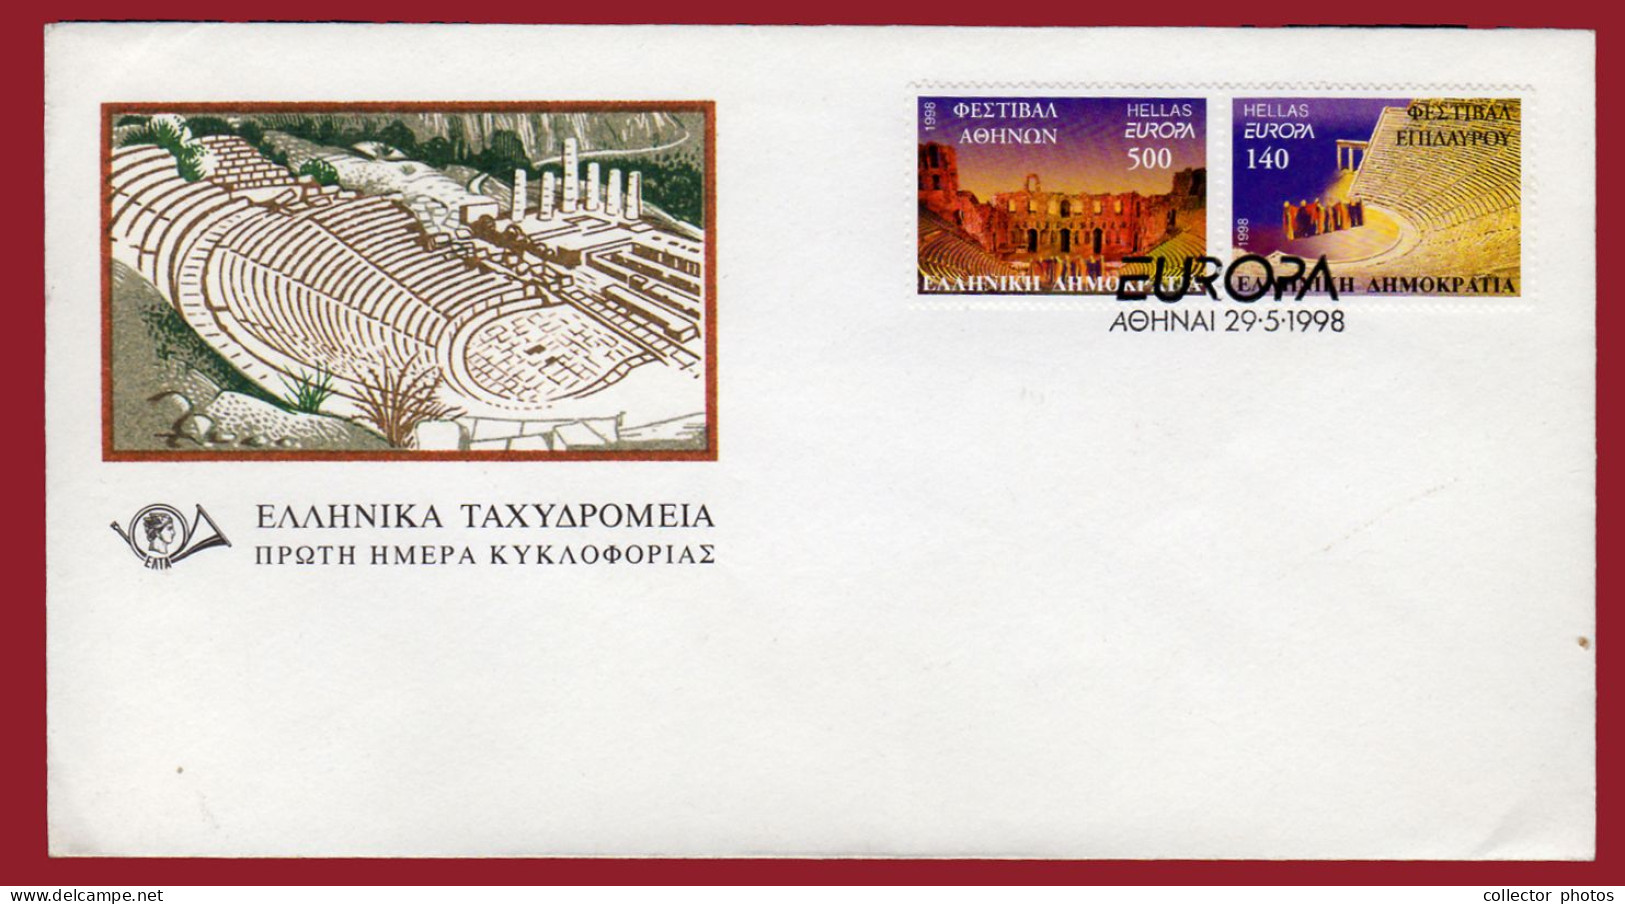 Greece. Lot of 12 First Day Covers FDC [de093]